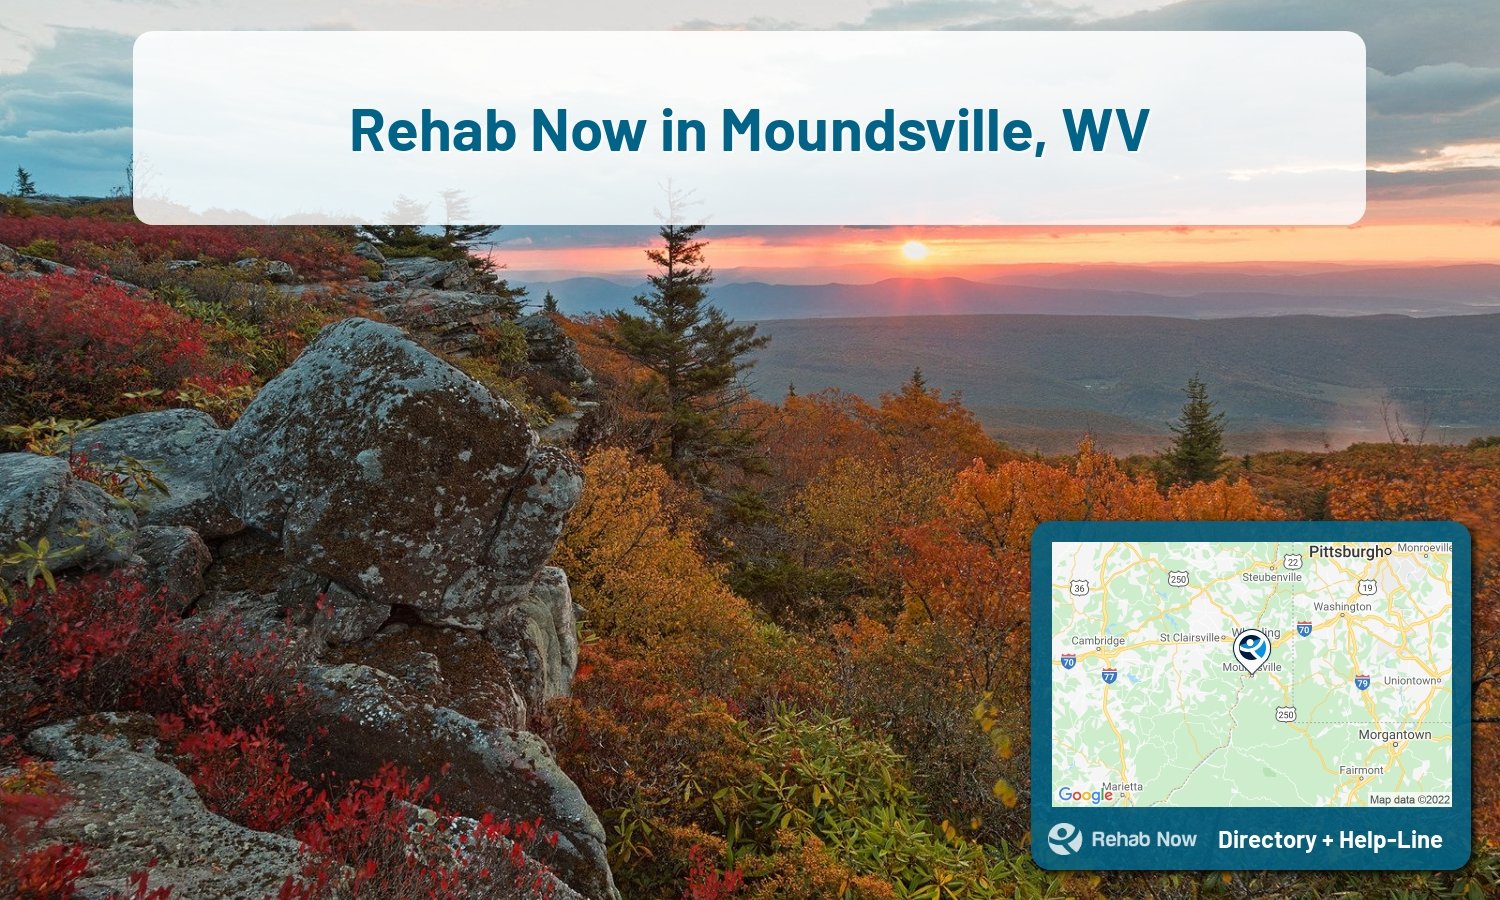 Moundsville, WV Treatment Centers. Find drug rehab in Moundsville, West Virginia, or detox and treatment programs. Get the right help now!